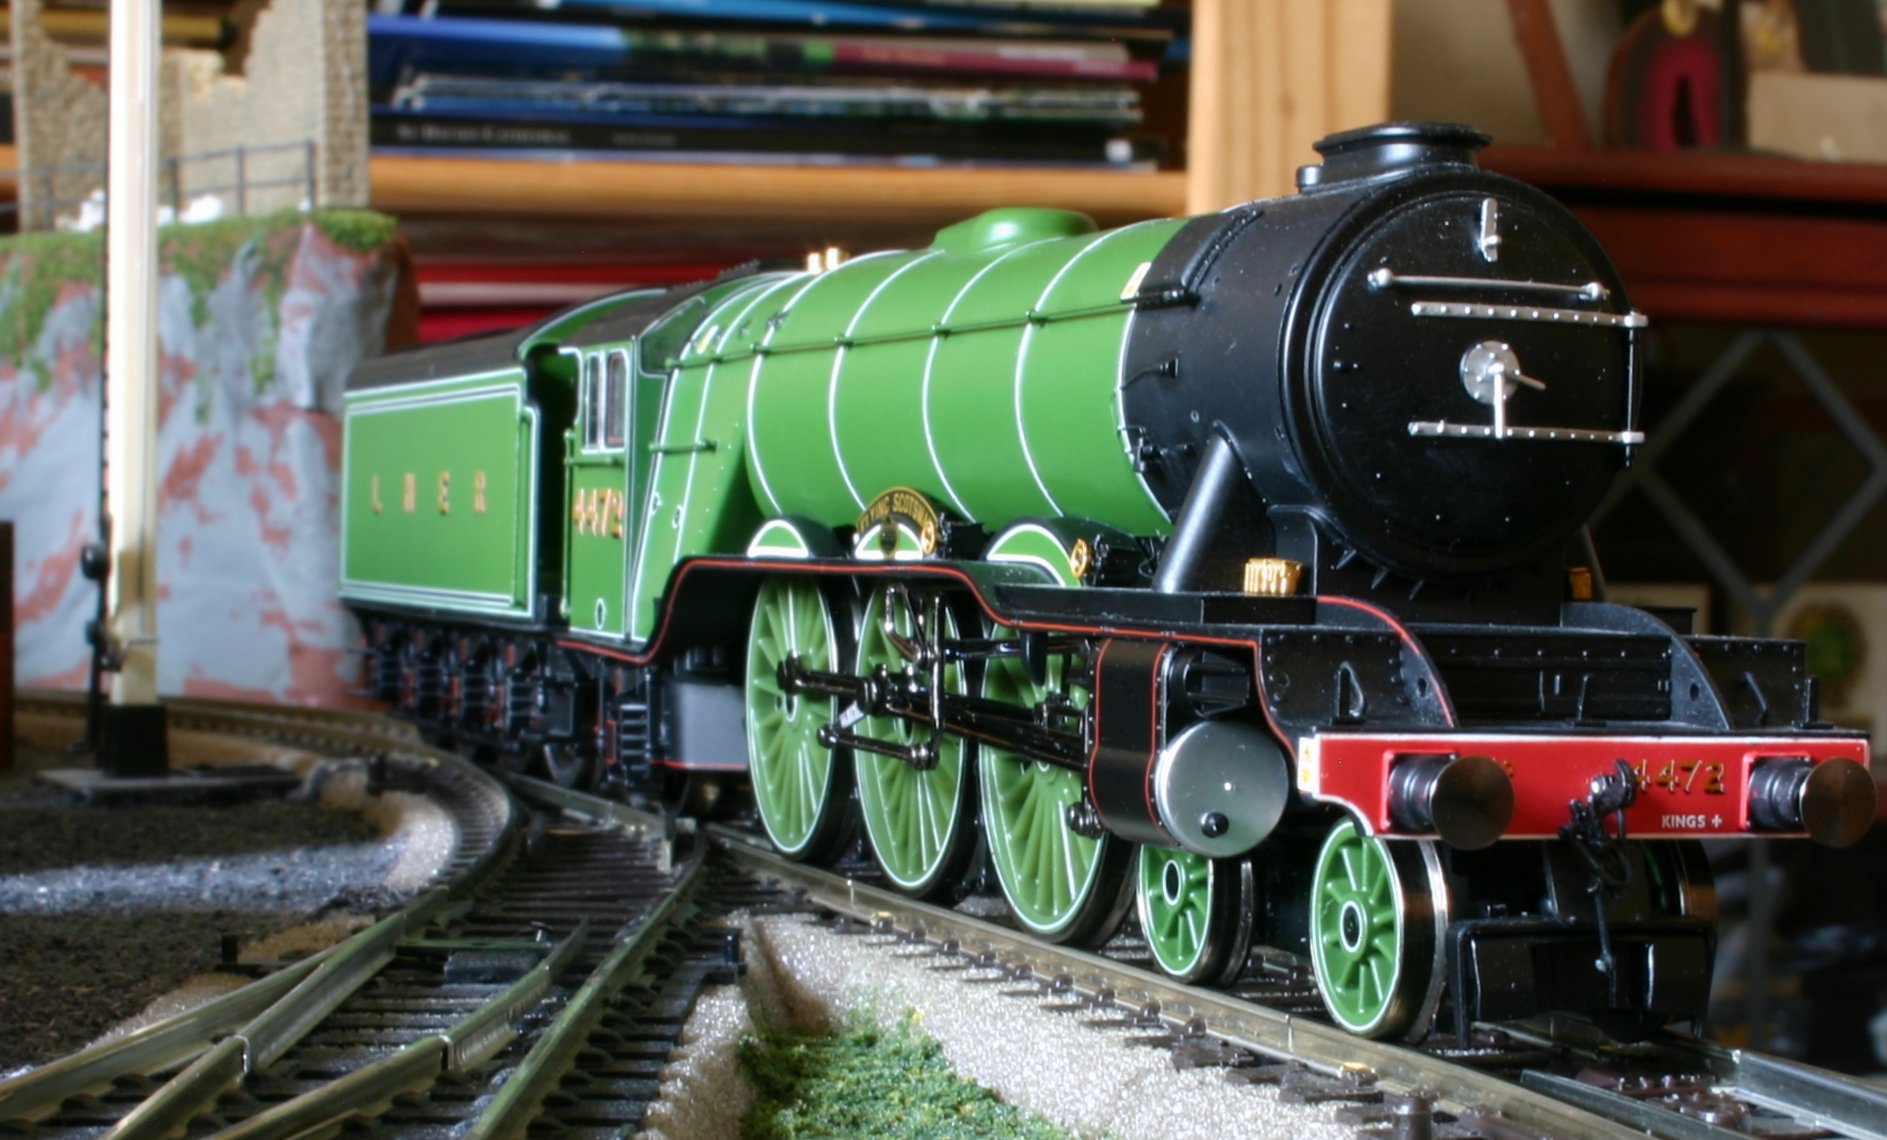 Hornby (AIM:HRN) - Discounting hits the buffers now- will this business deliver for shareholders?